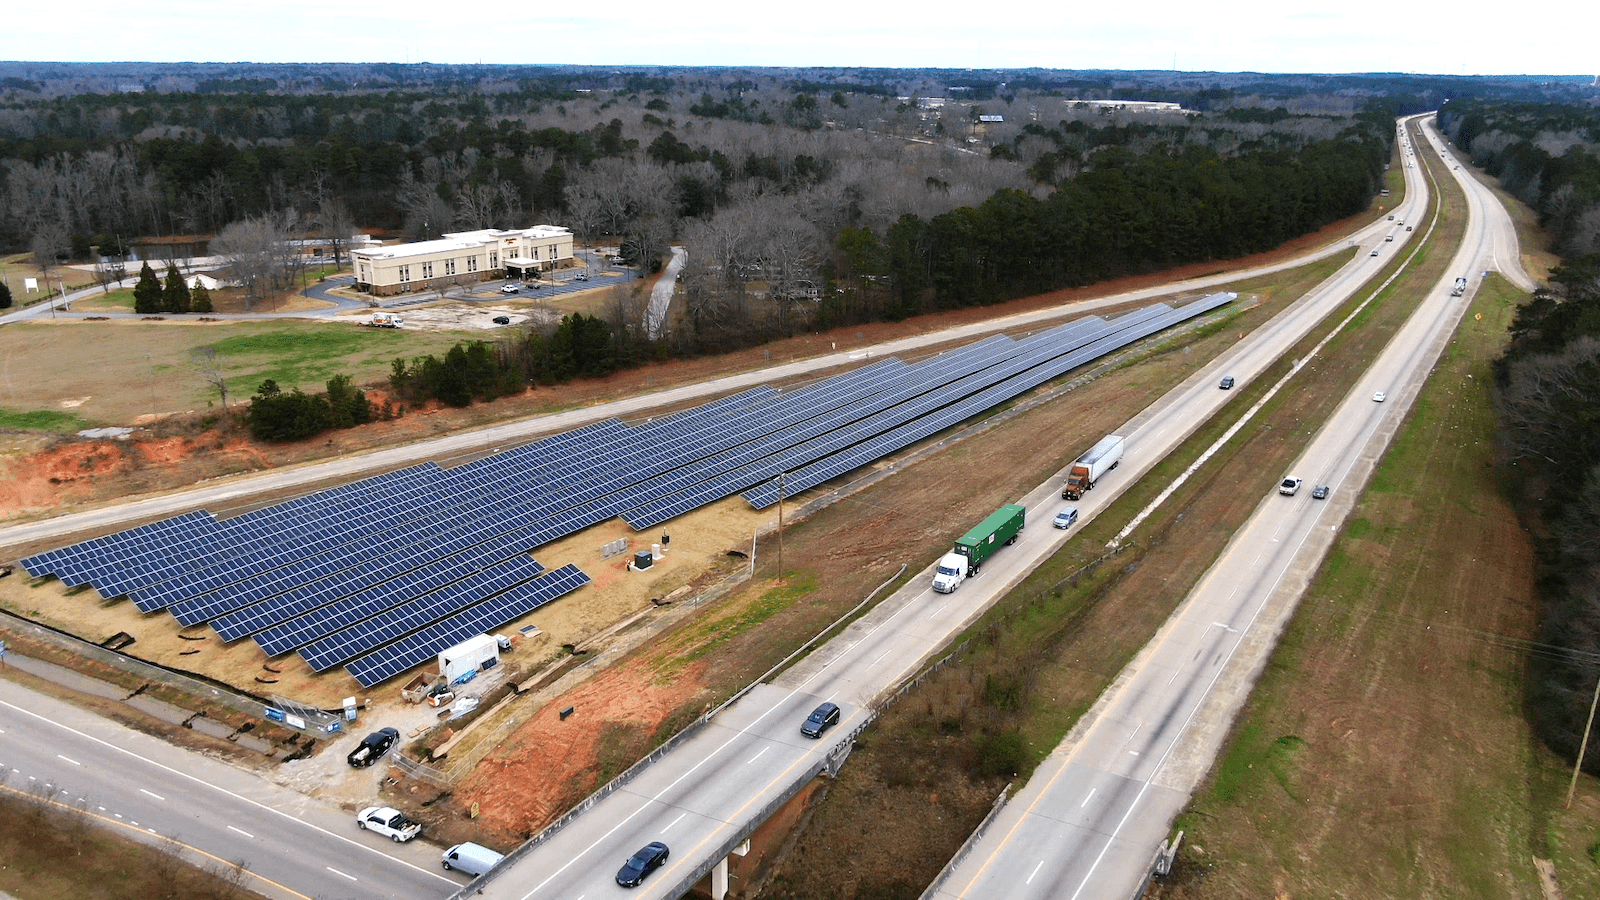 That empty space next to highways? Put solar panels on it.